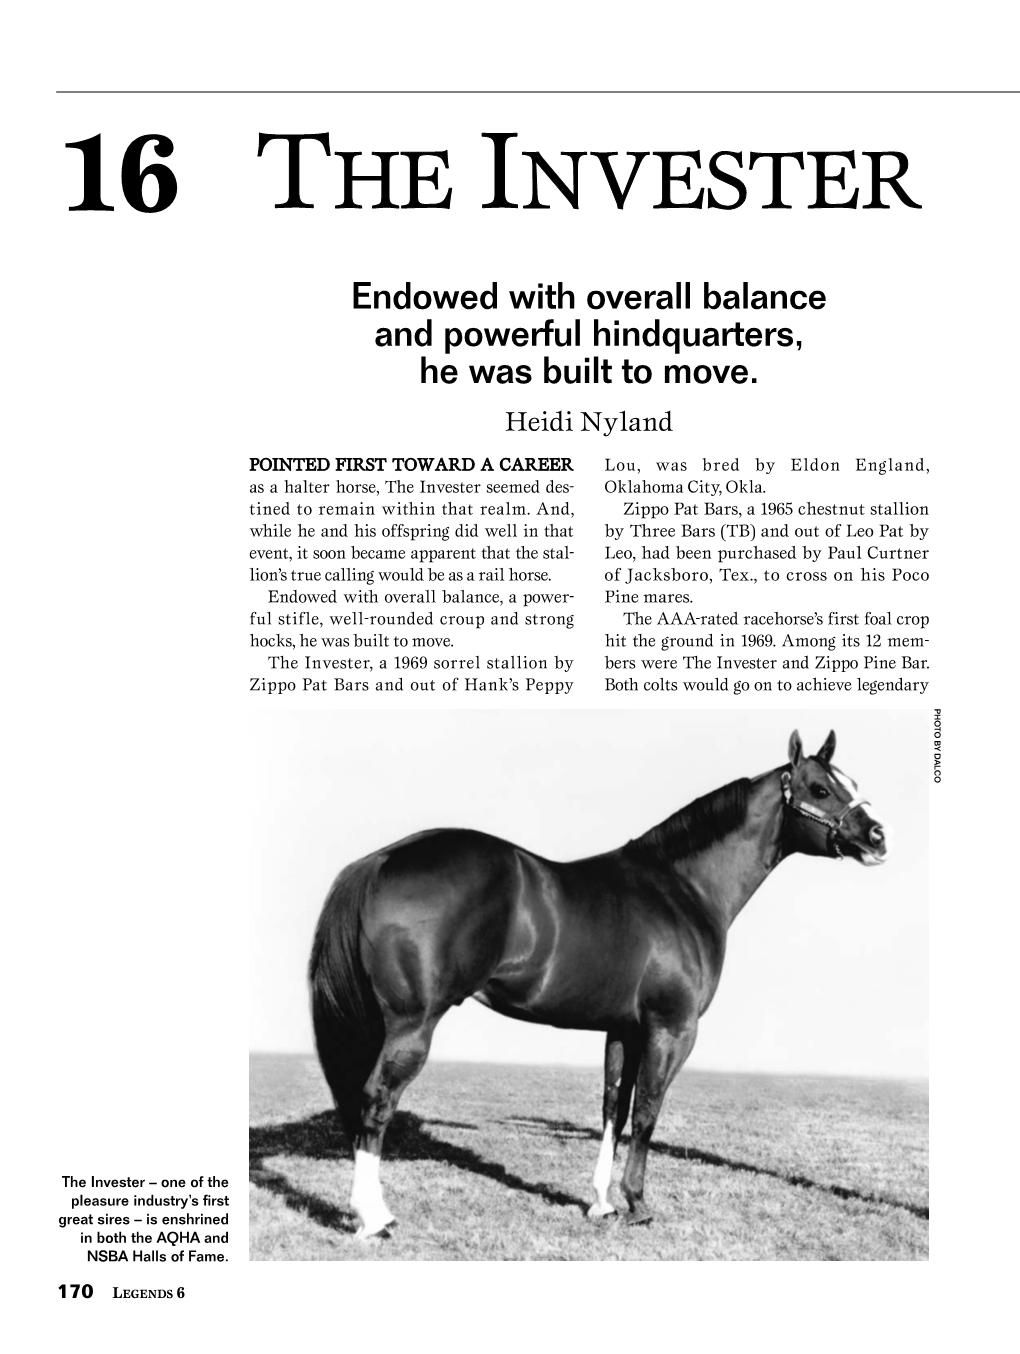 The Invester